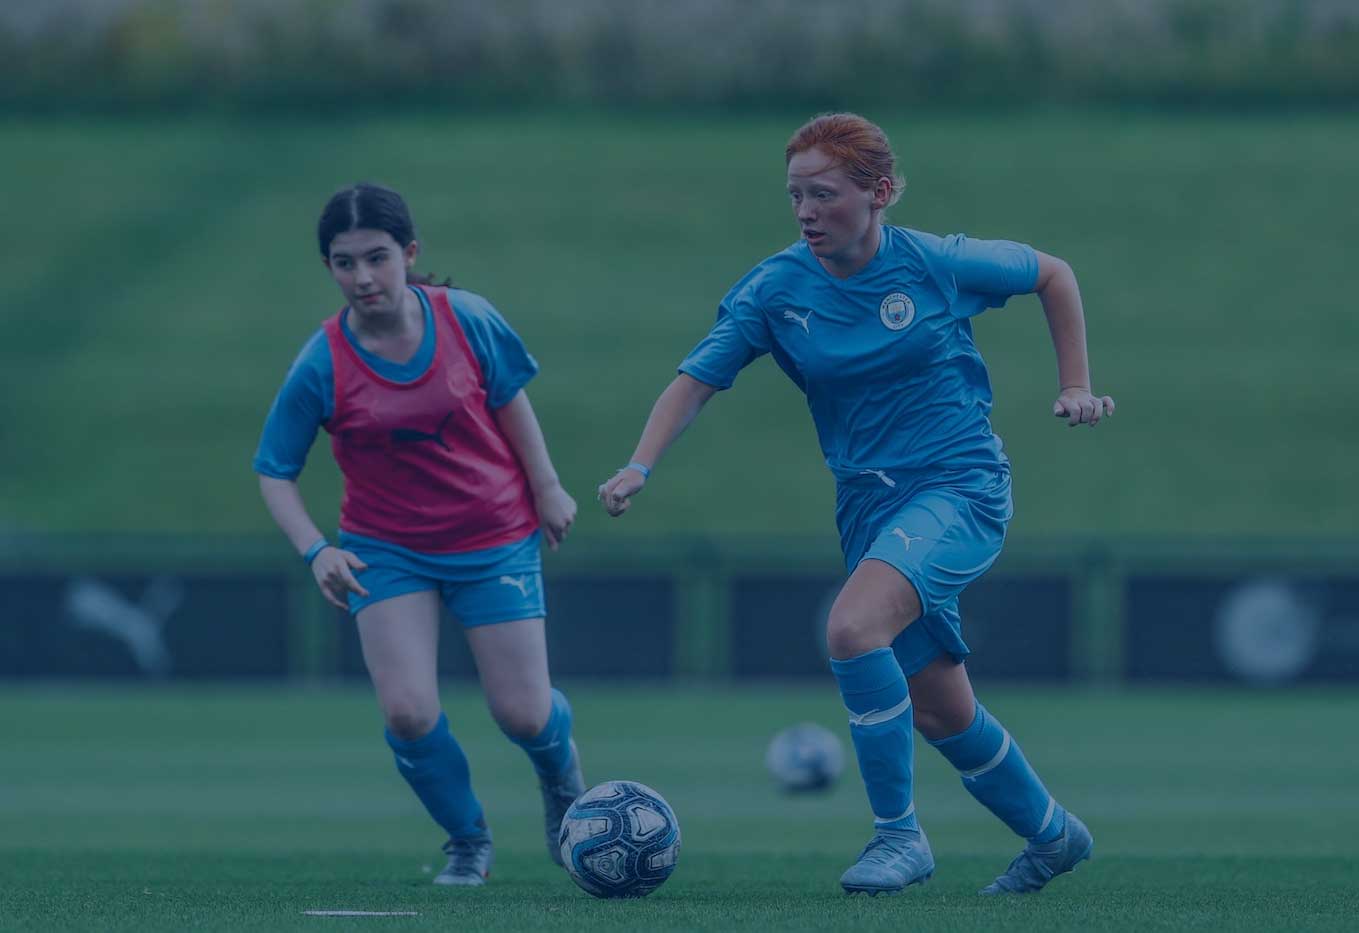 Two young girls chasing a football. Both are wearing a blue Manchester City Football School kit. One girl is wearing a red bib with a puma logo.